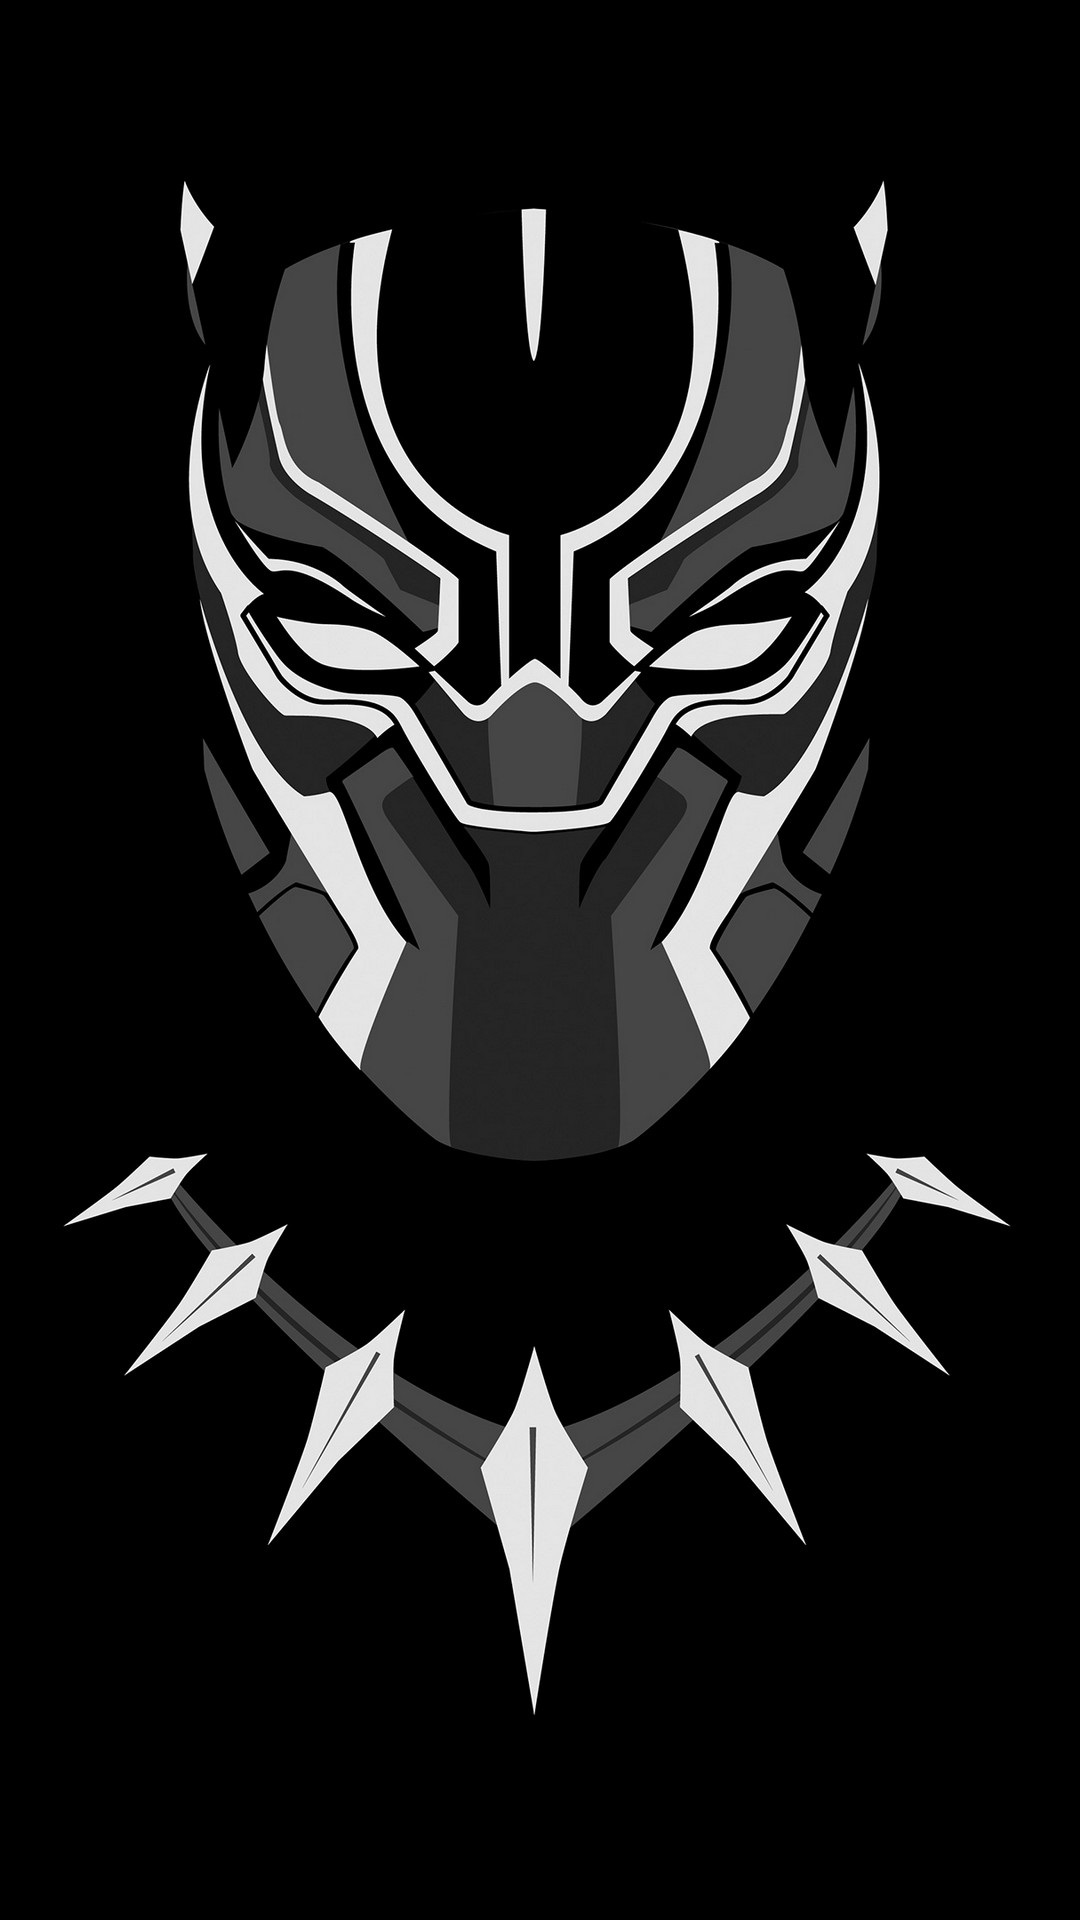 Wallpaper Android Black Panther With high-resolution 1080X1920 pixel. You can use this wallpaper for your Android backgrounds, Tablet, Samsung Screensavers, Mobile Phone Lock Screen and another Smartphones device